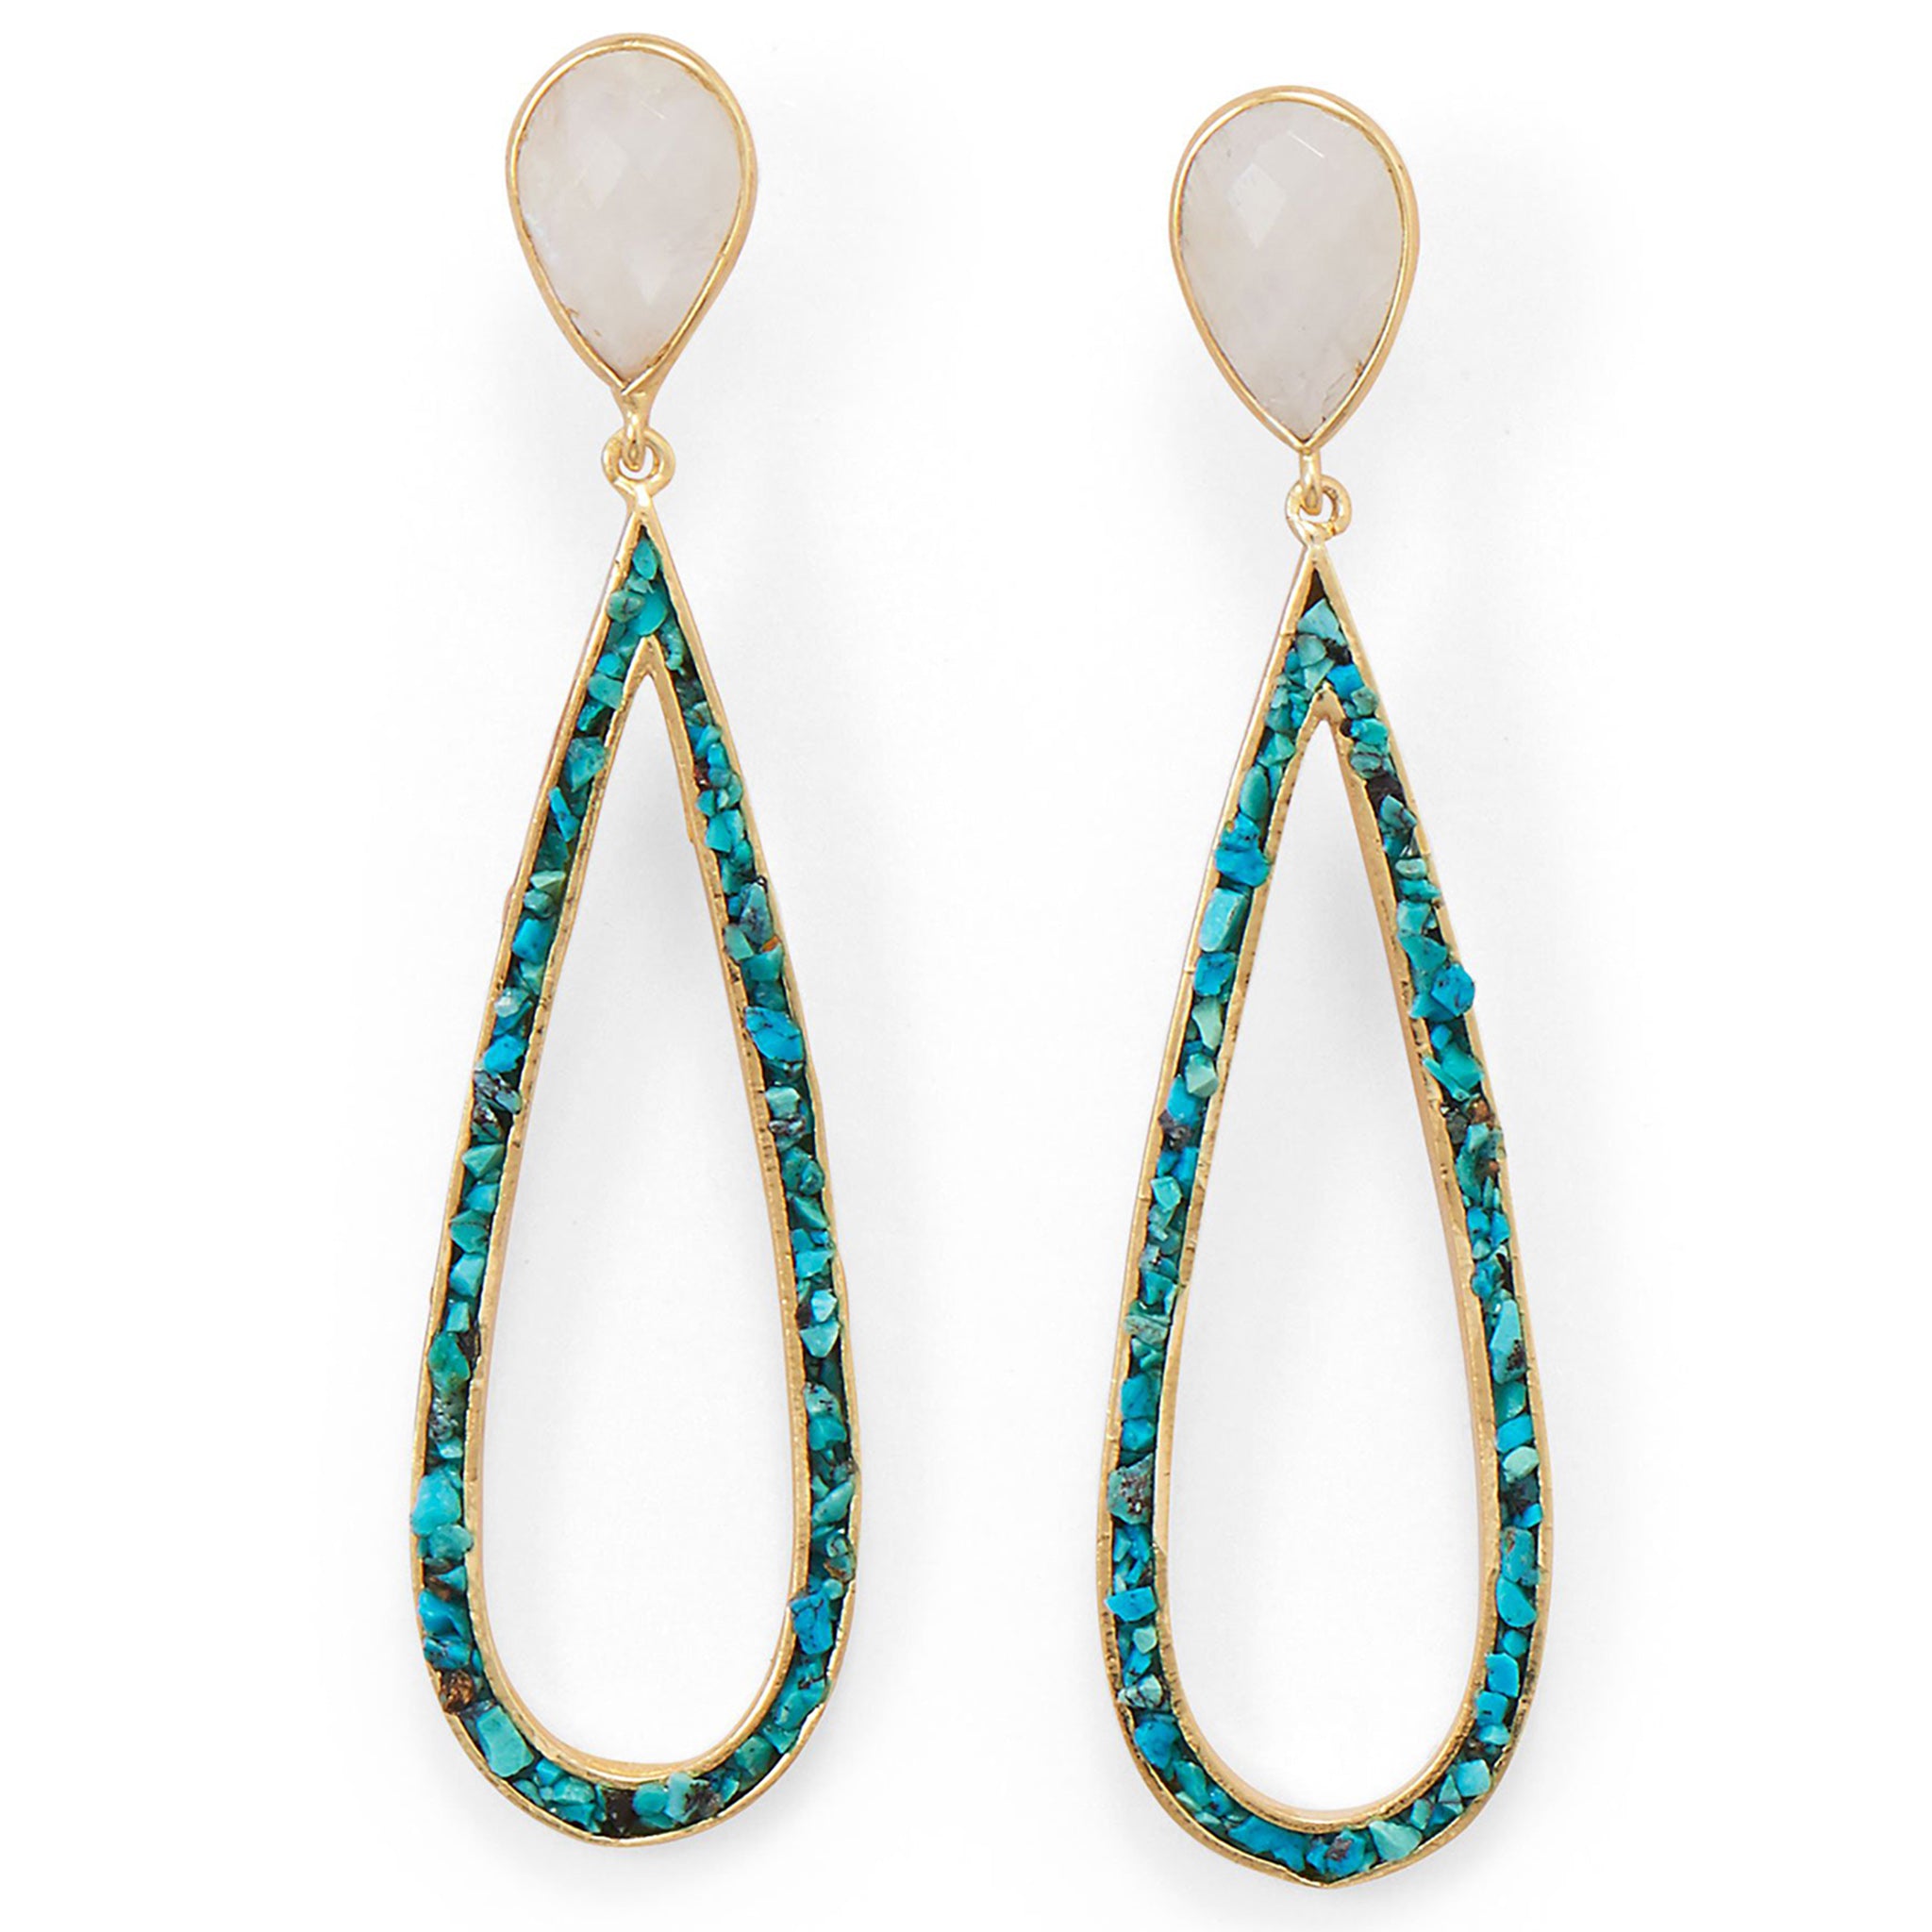 Rainbow Moonstone with Turquoise Chip Earrings